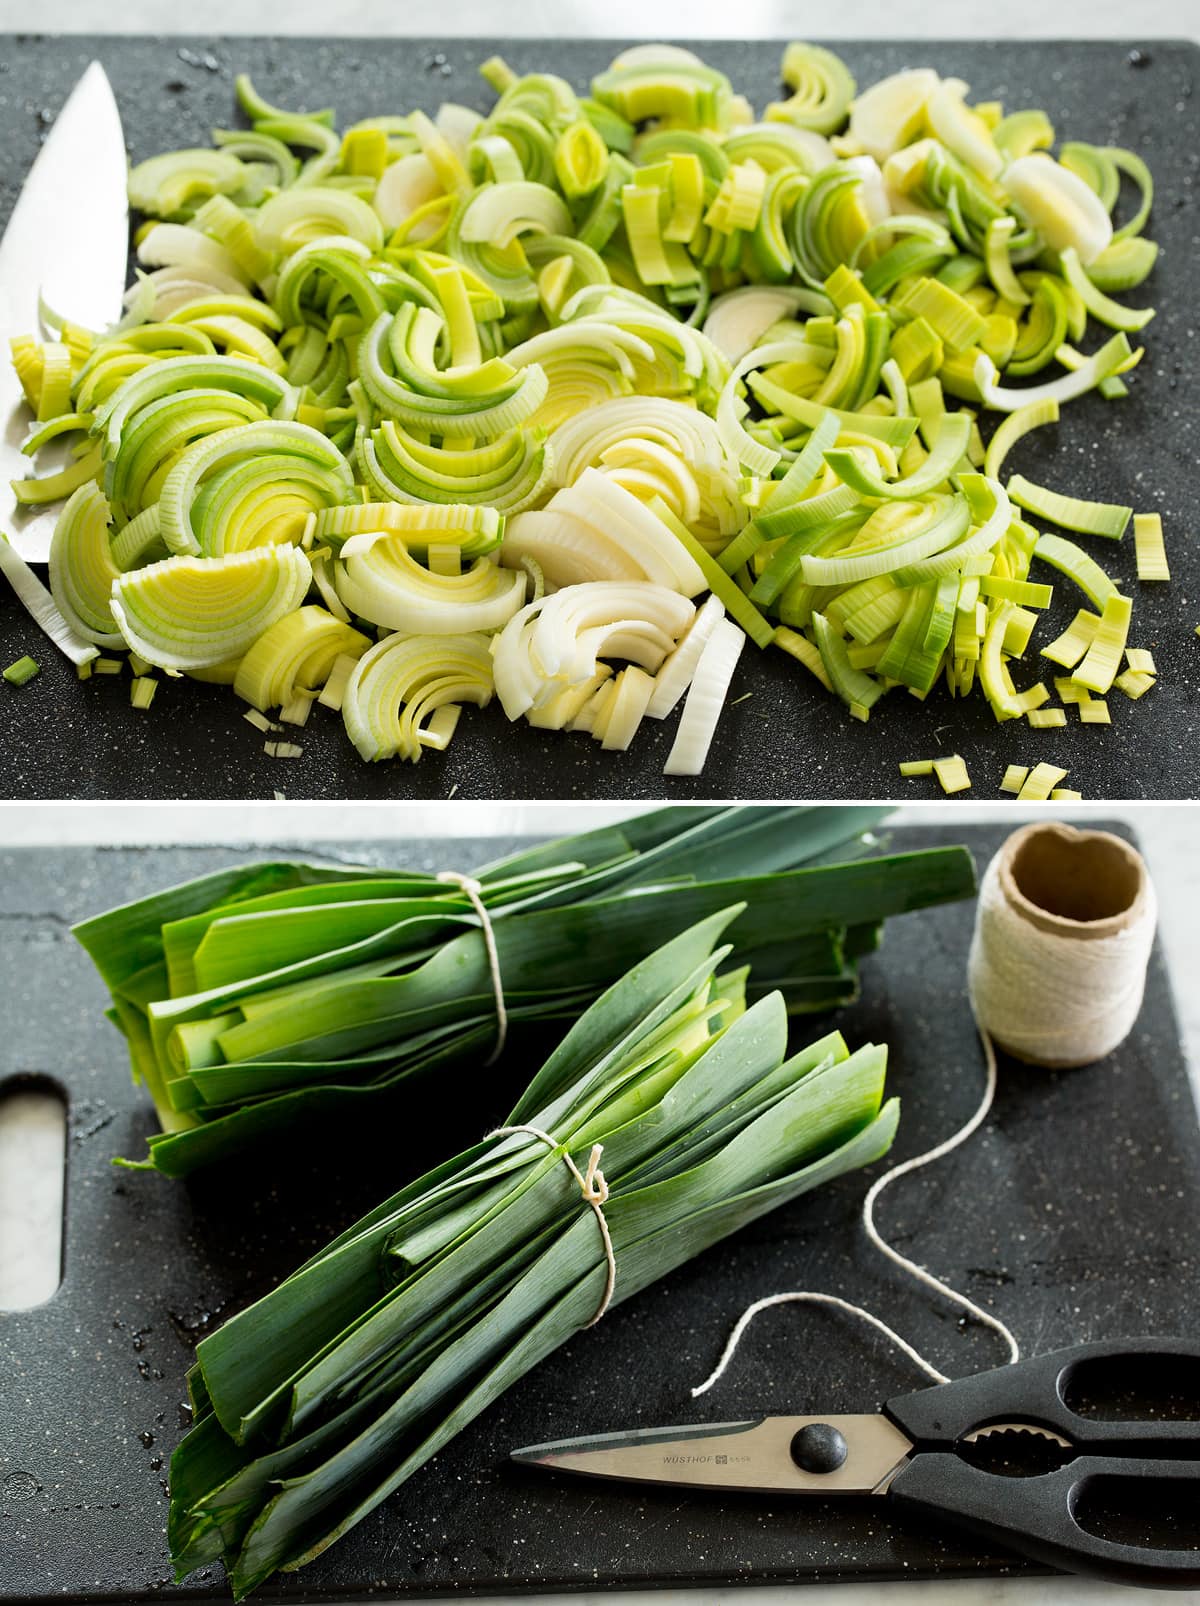 Photo showing how to cut leeks for soup.